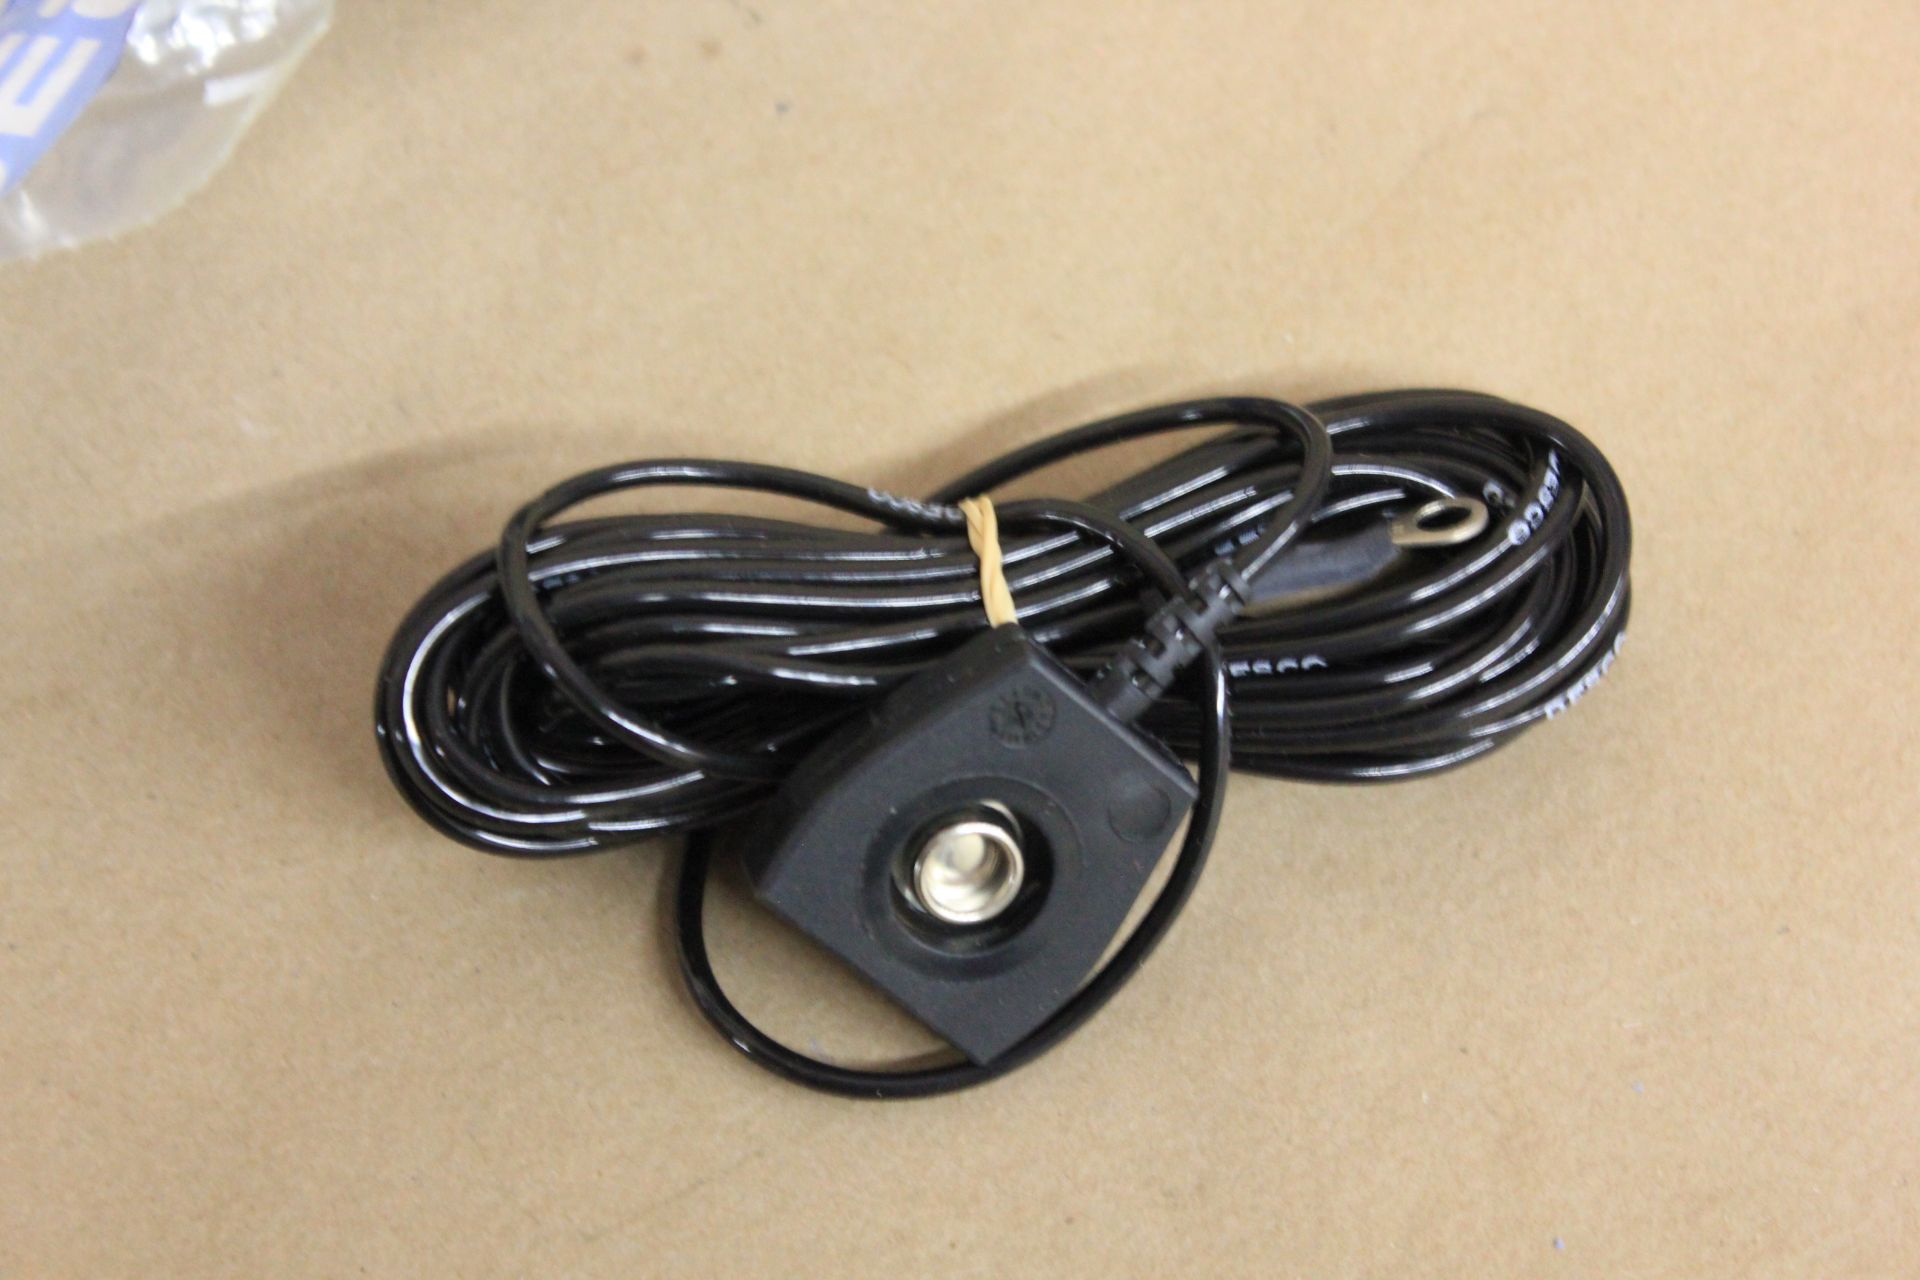 LOT OF NEW DESCO ESD GROUNDING CABLES - Image 3 of 3